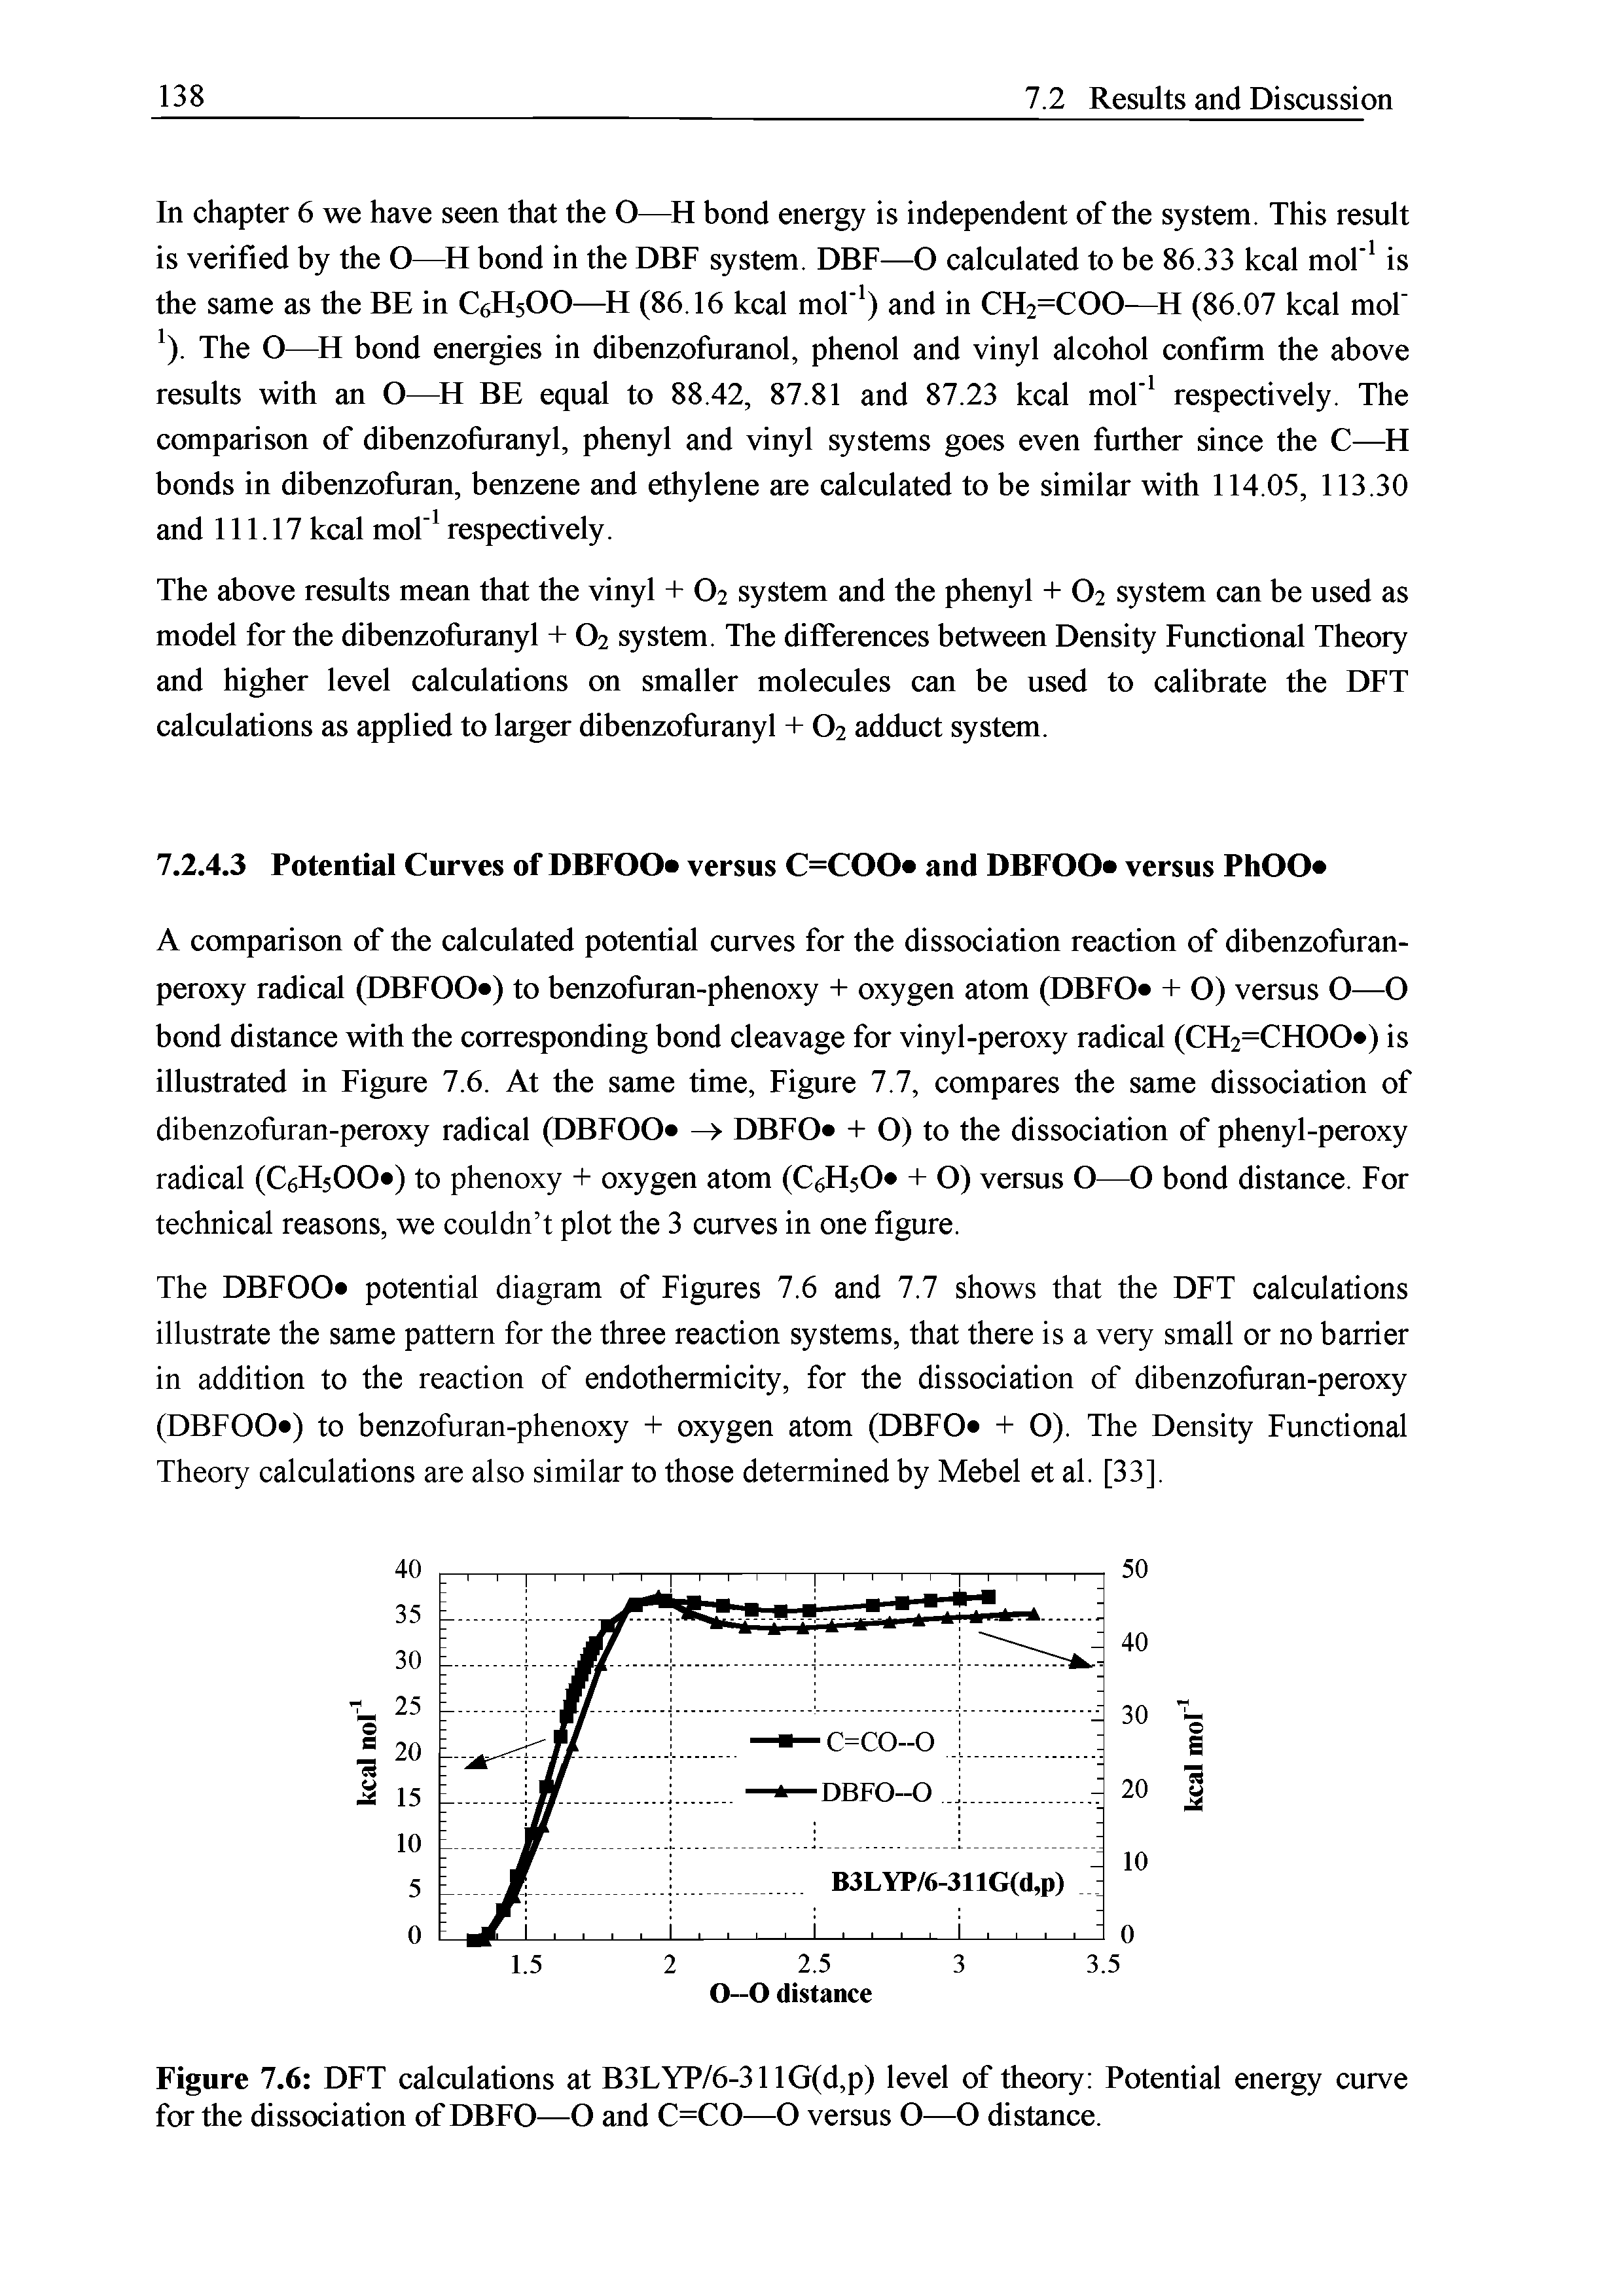 Figure 7.6 DFT calculations at B3LYP/6-311G(d,p) level of theory Potential energy curve for the dissociation of DBFO—O and C=CO—O versus O—O distance.